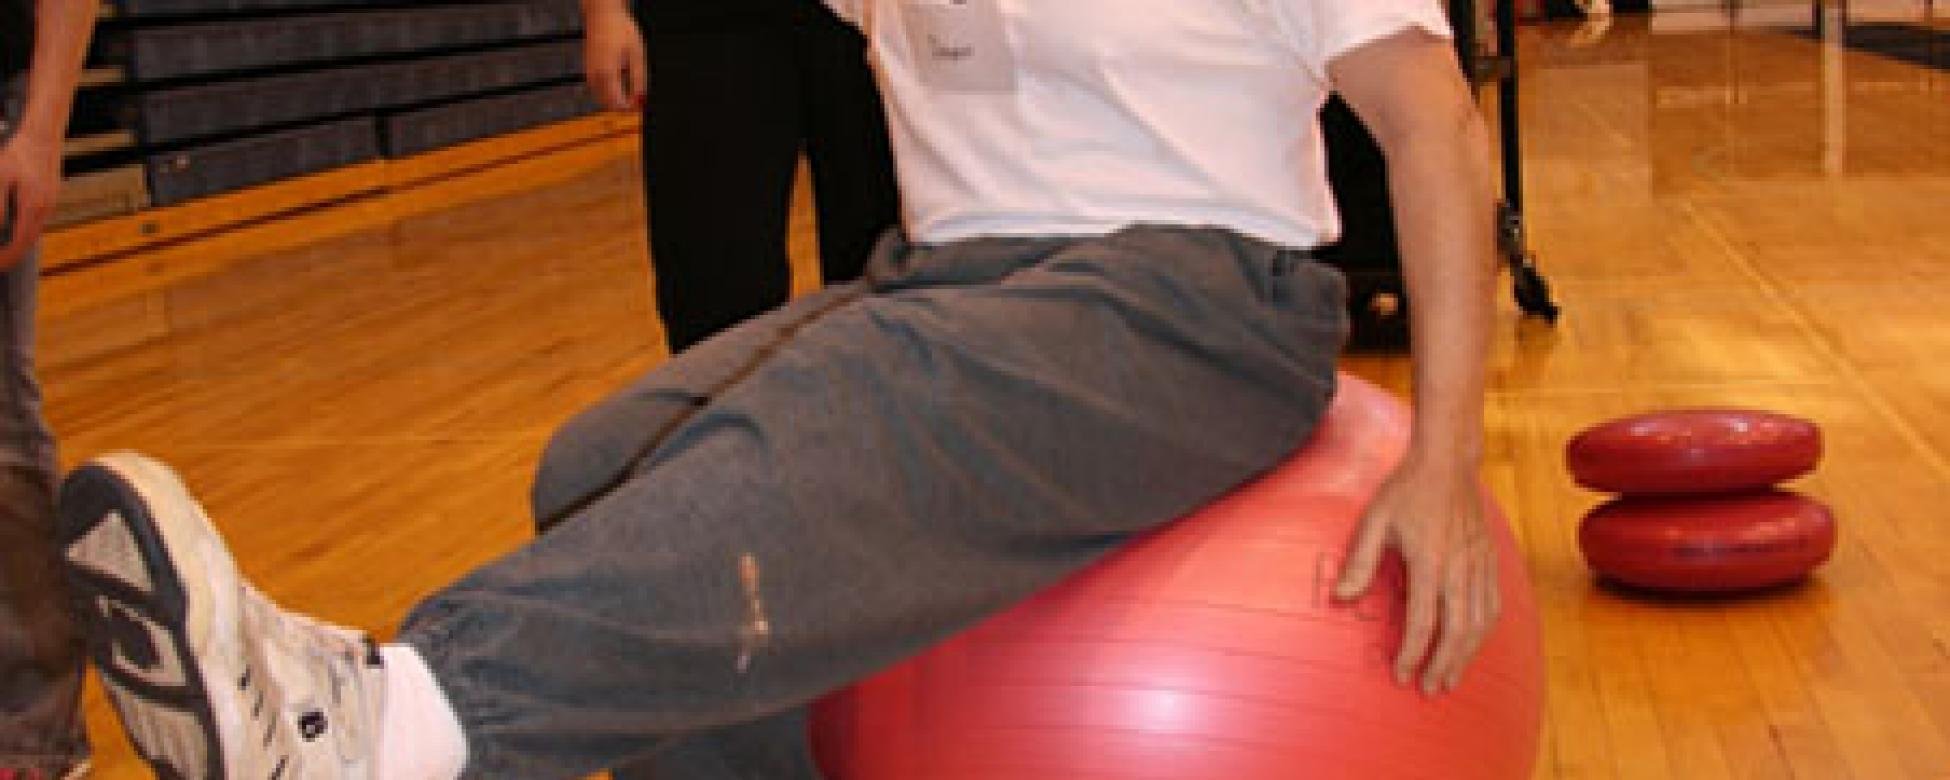 student on a ball performing exercise